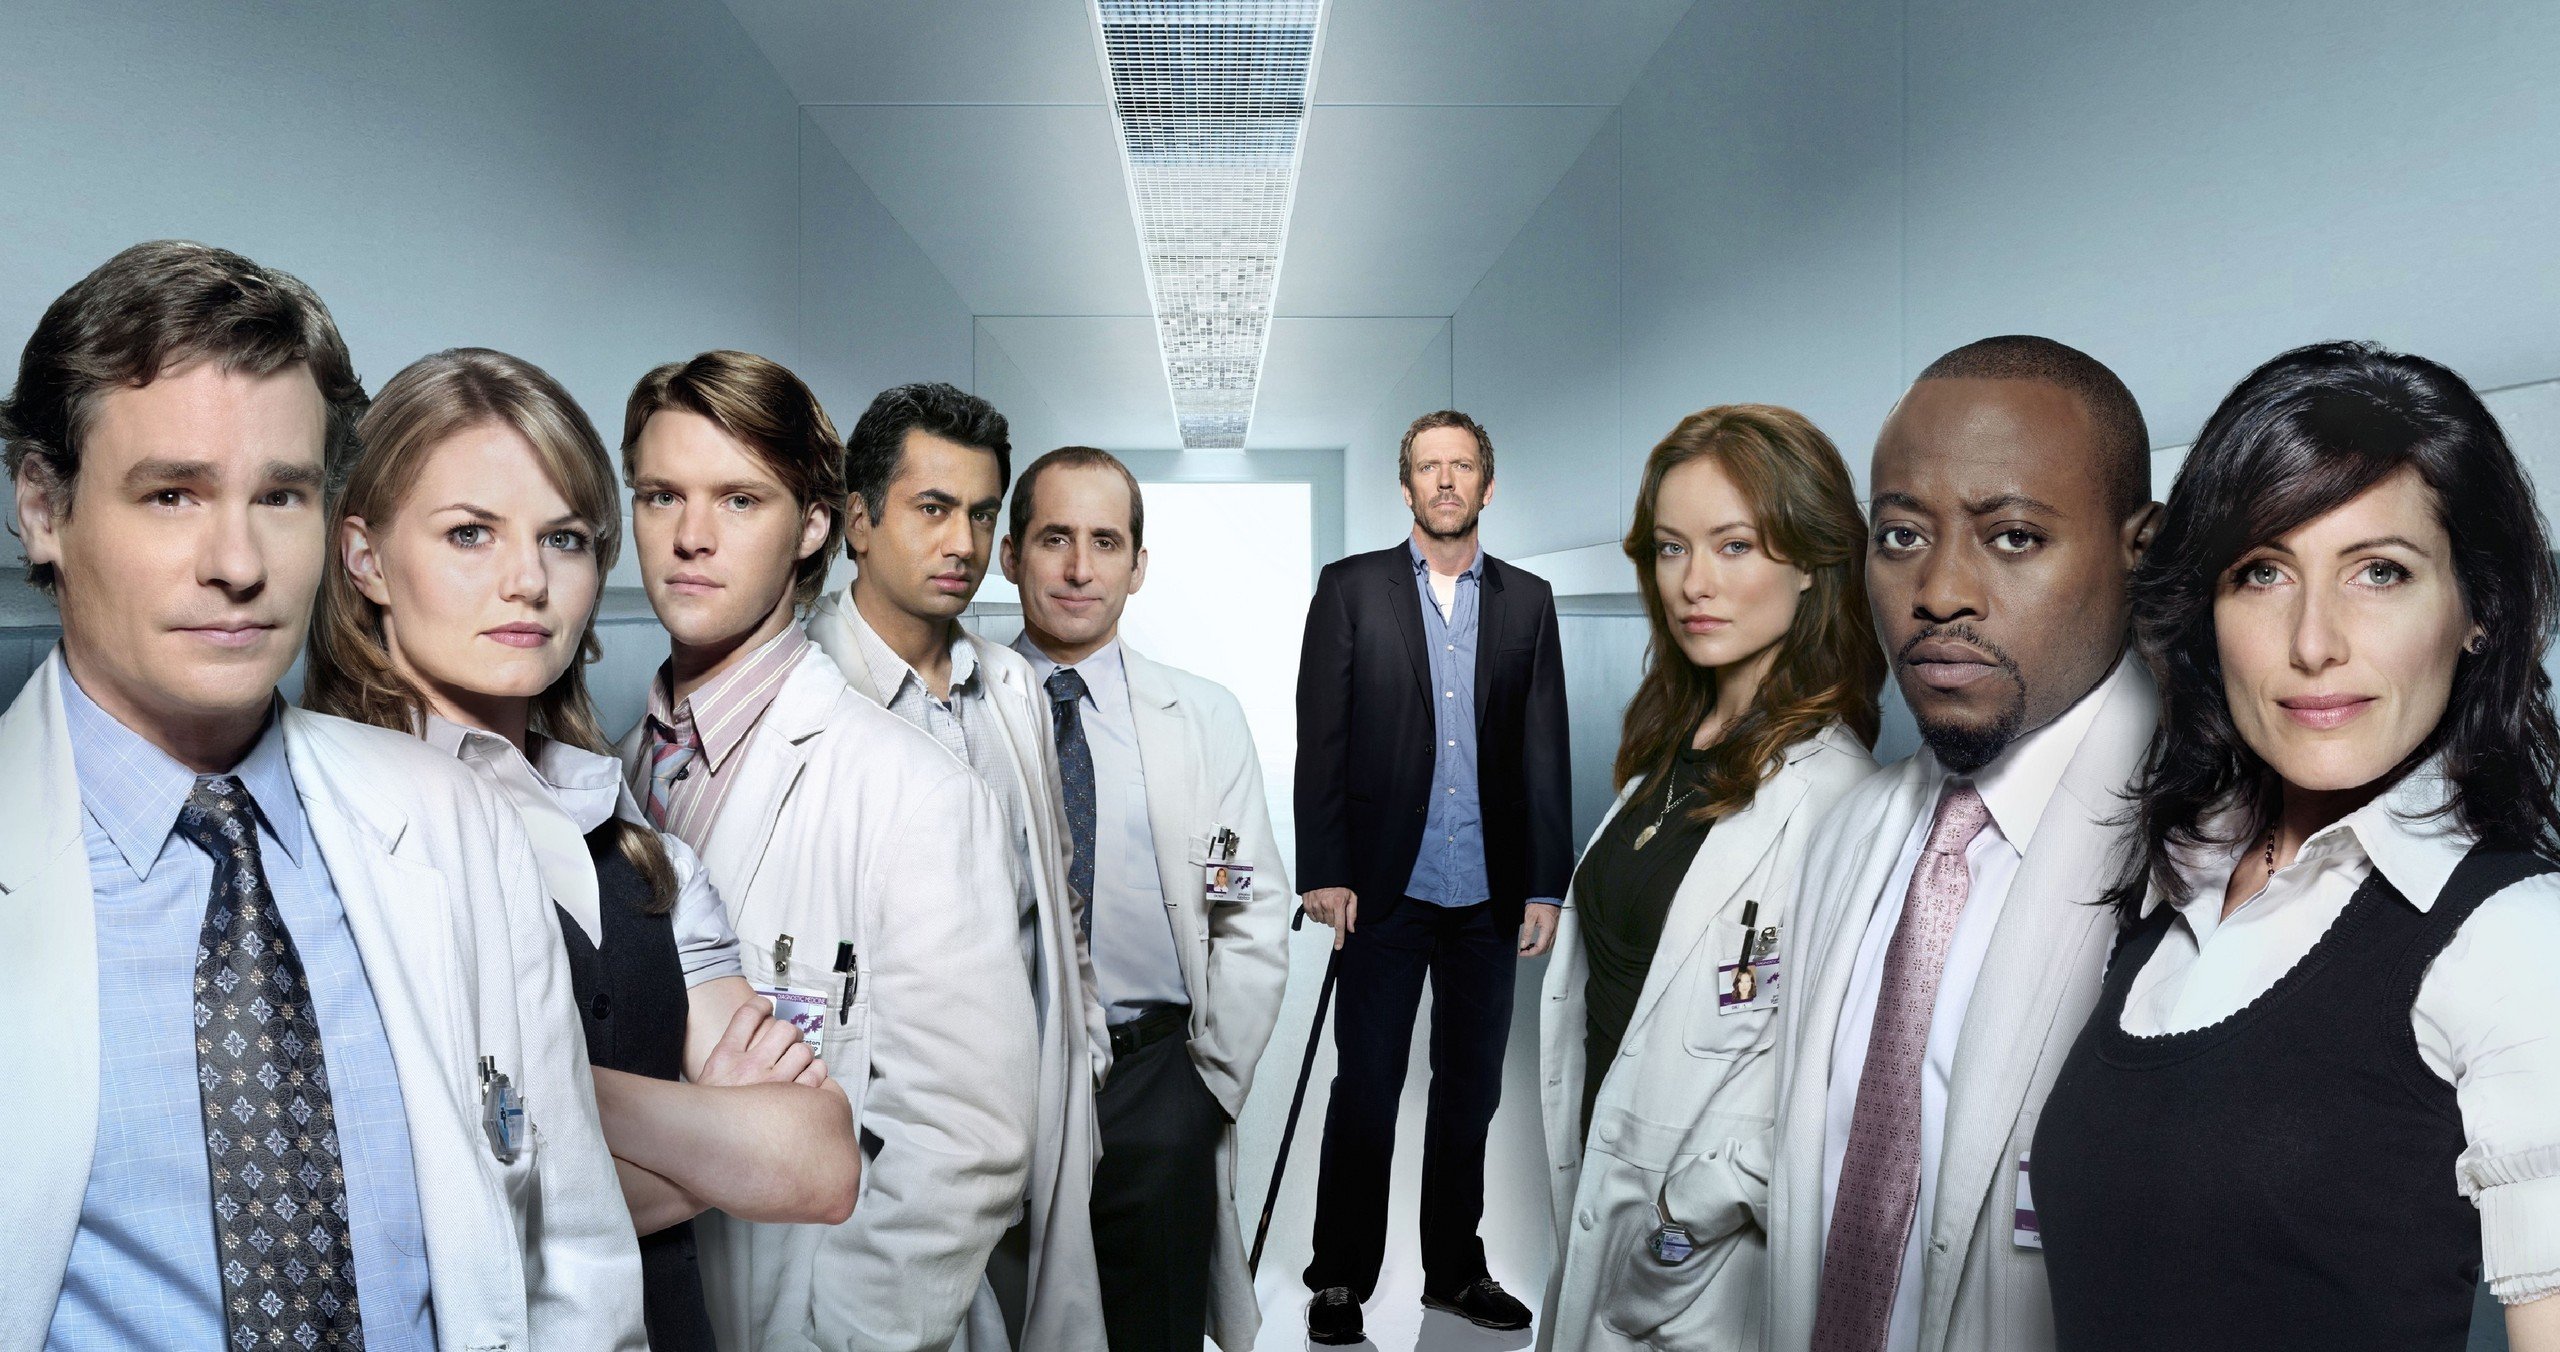 House MD Wallpaper 2 by Prox1ma on DeviantArt